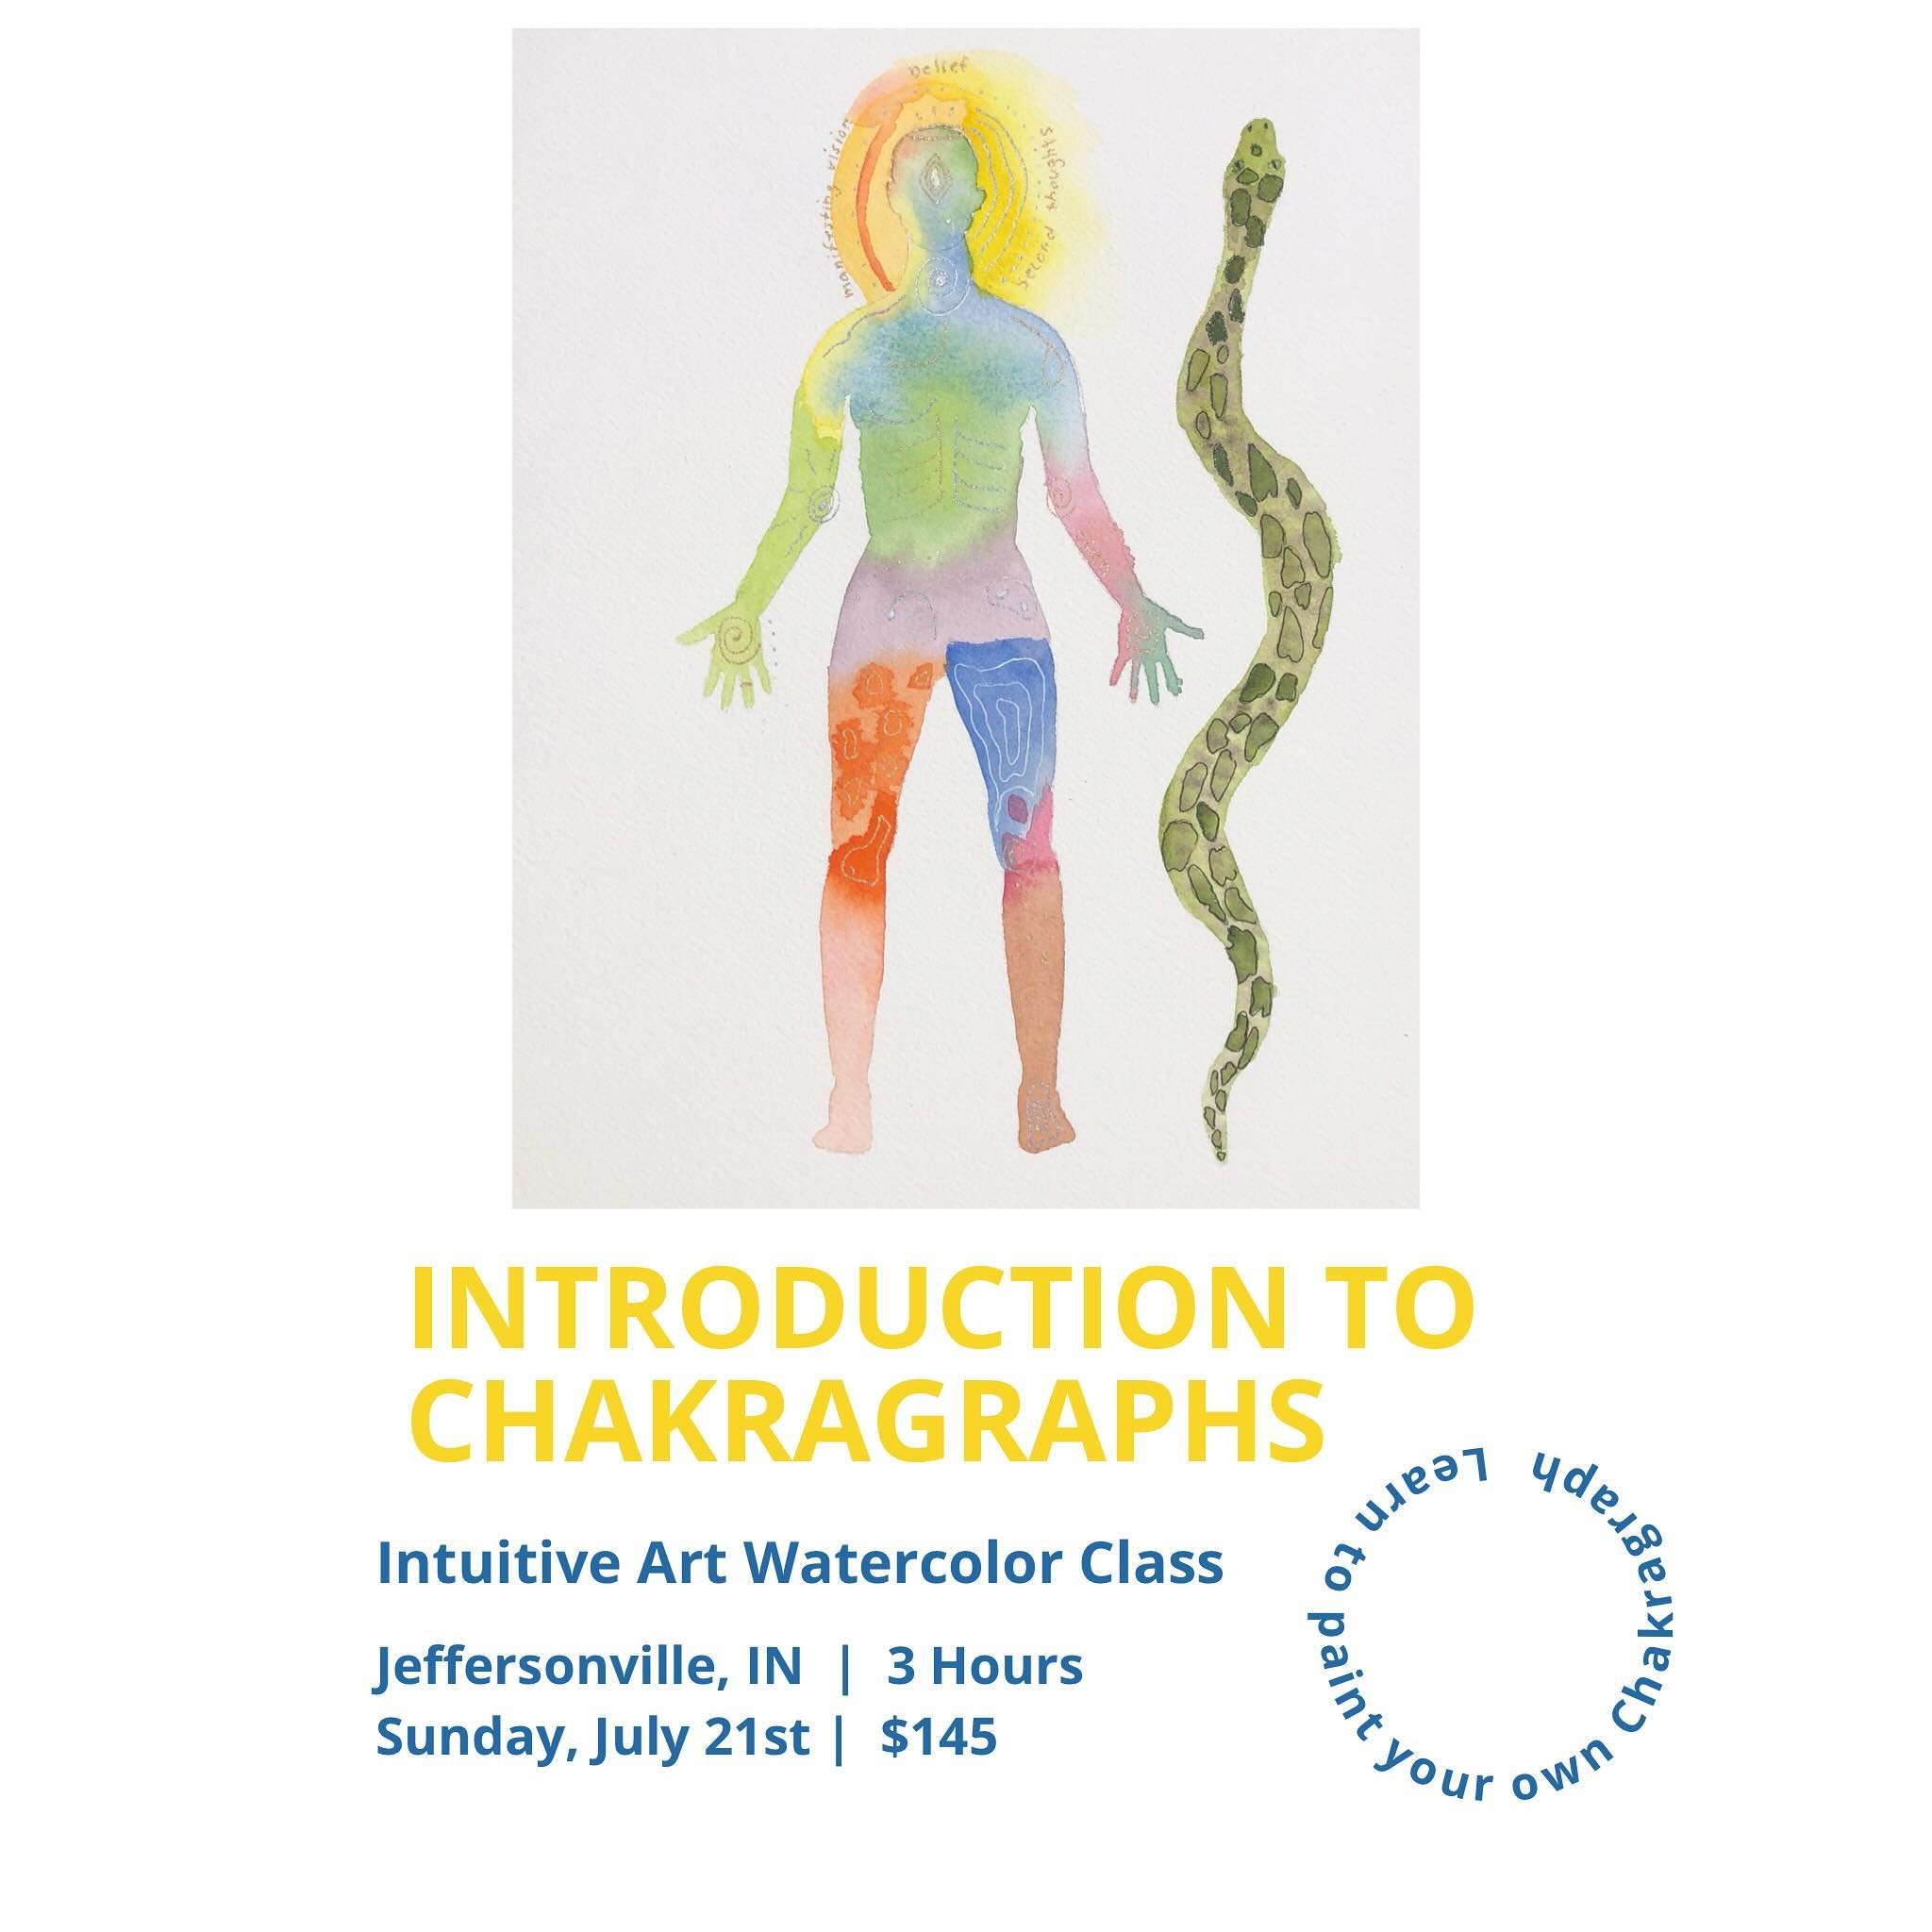 You are invited to dive deep into the immersive world of intuitive watercolor in this unique, sacred workshop where all experience levels are welcome.

The Chakragraph System is a color divination system that accurately renders the energy of the subt